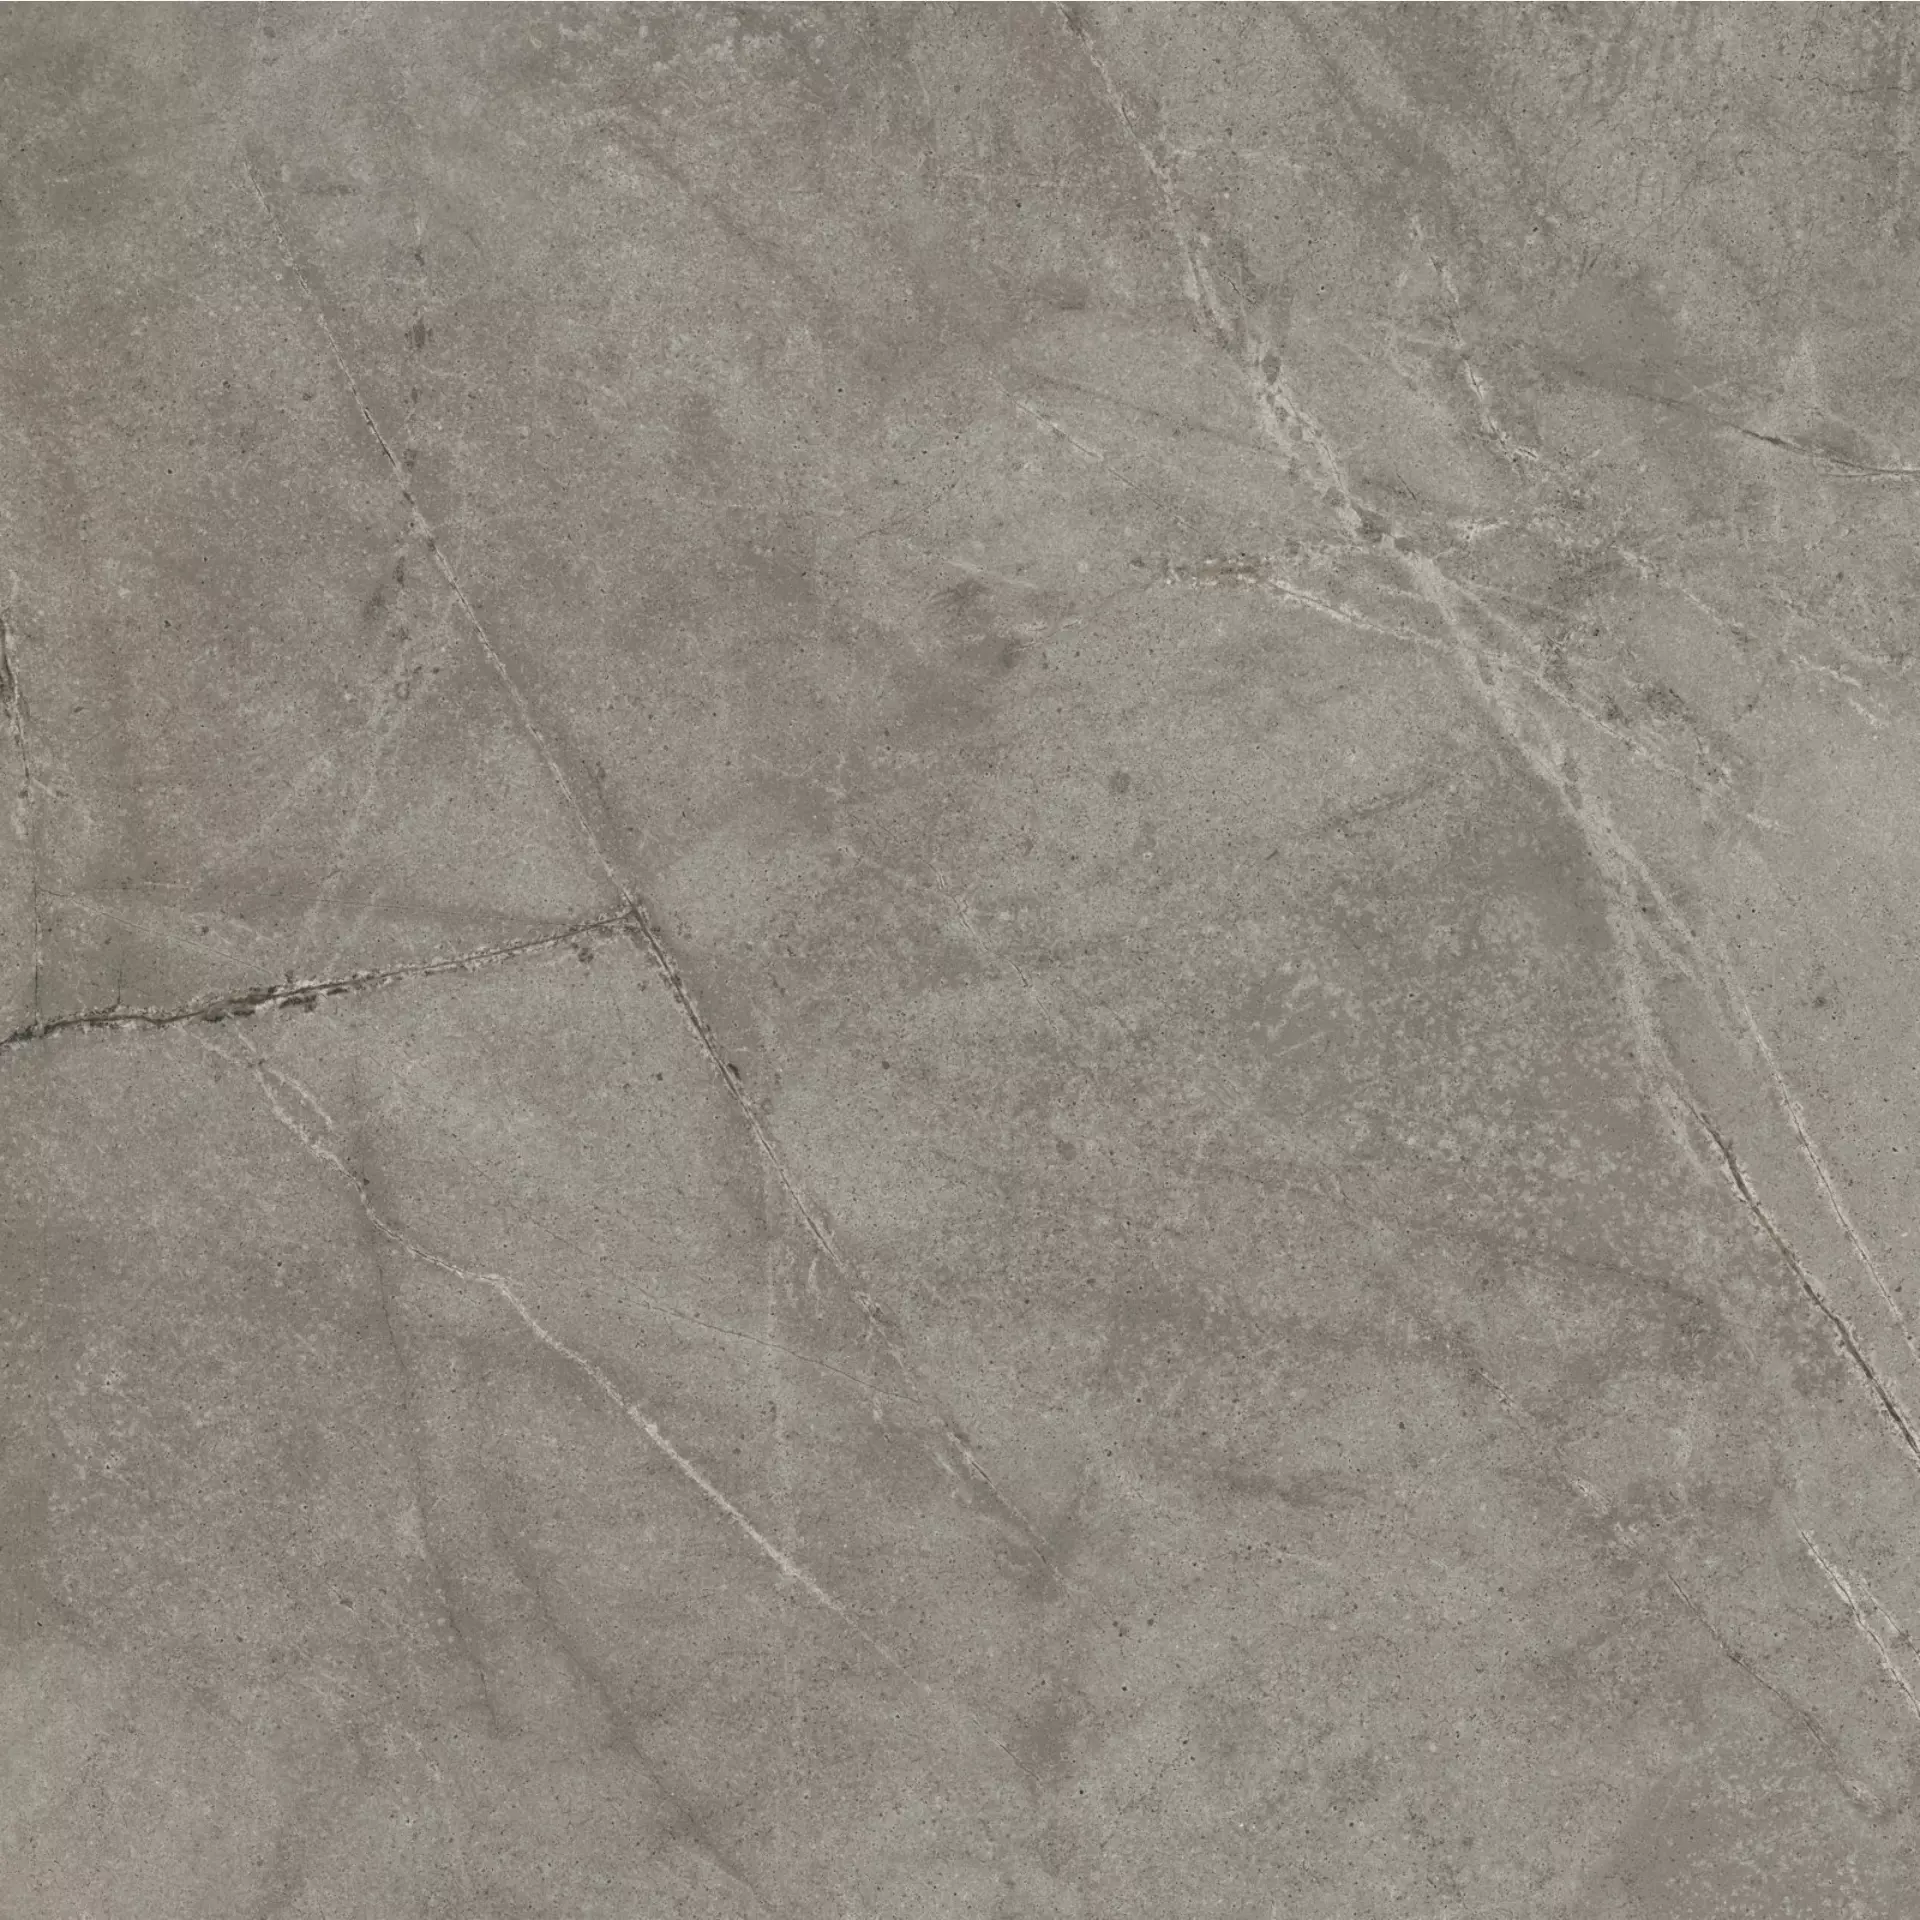 ABK Atlantis Taupe Naturale PF60005885 90x90cm rectified 8,5mm